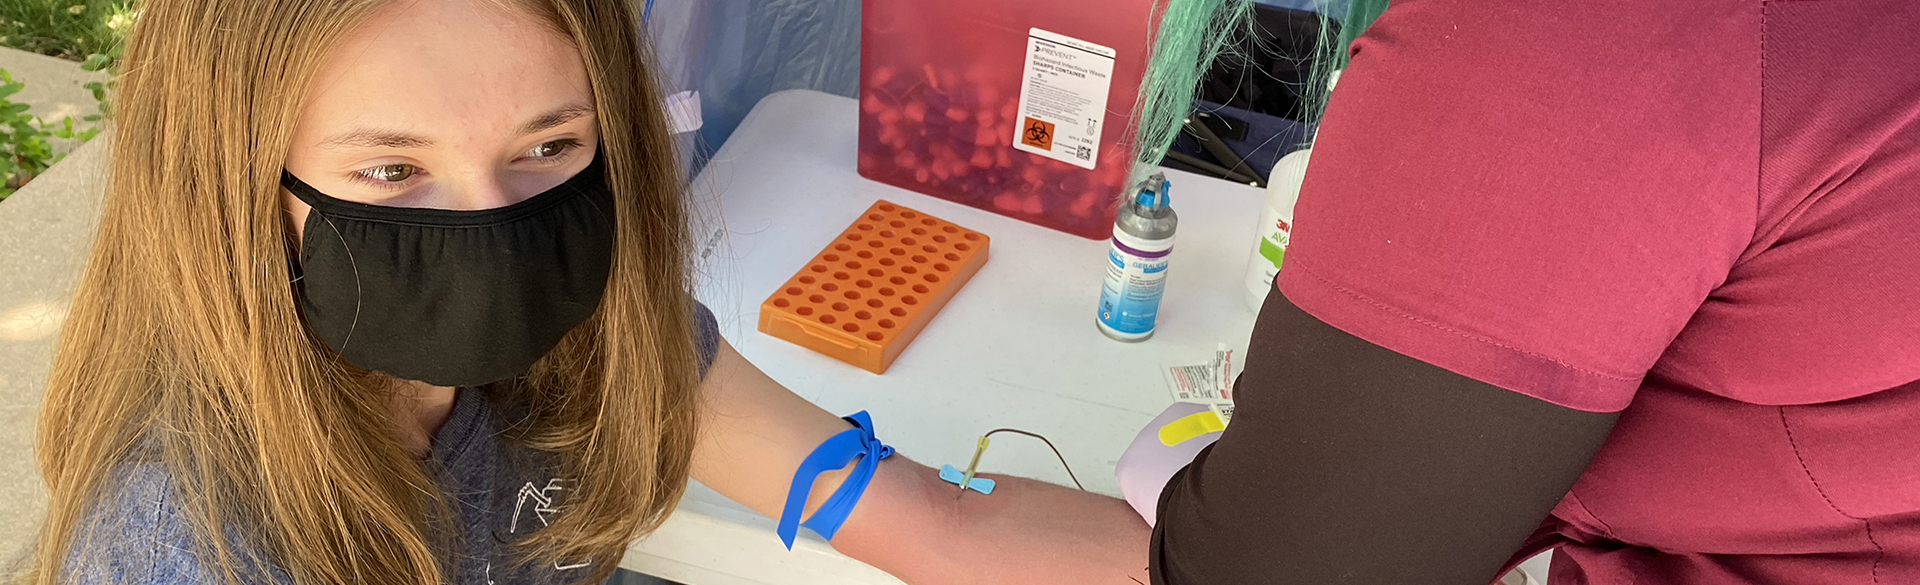 A young girl has blood drawn at an ASK station